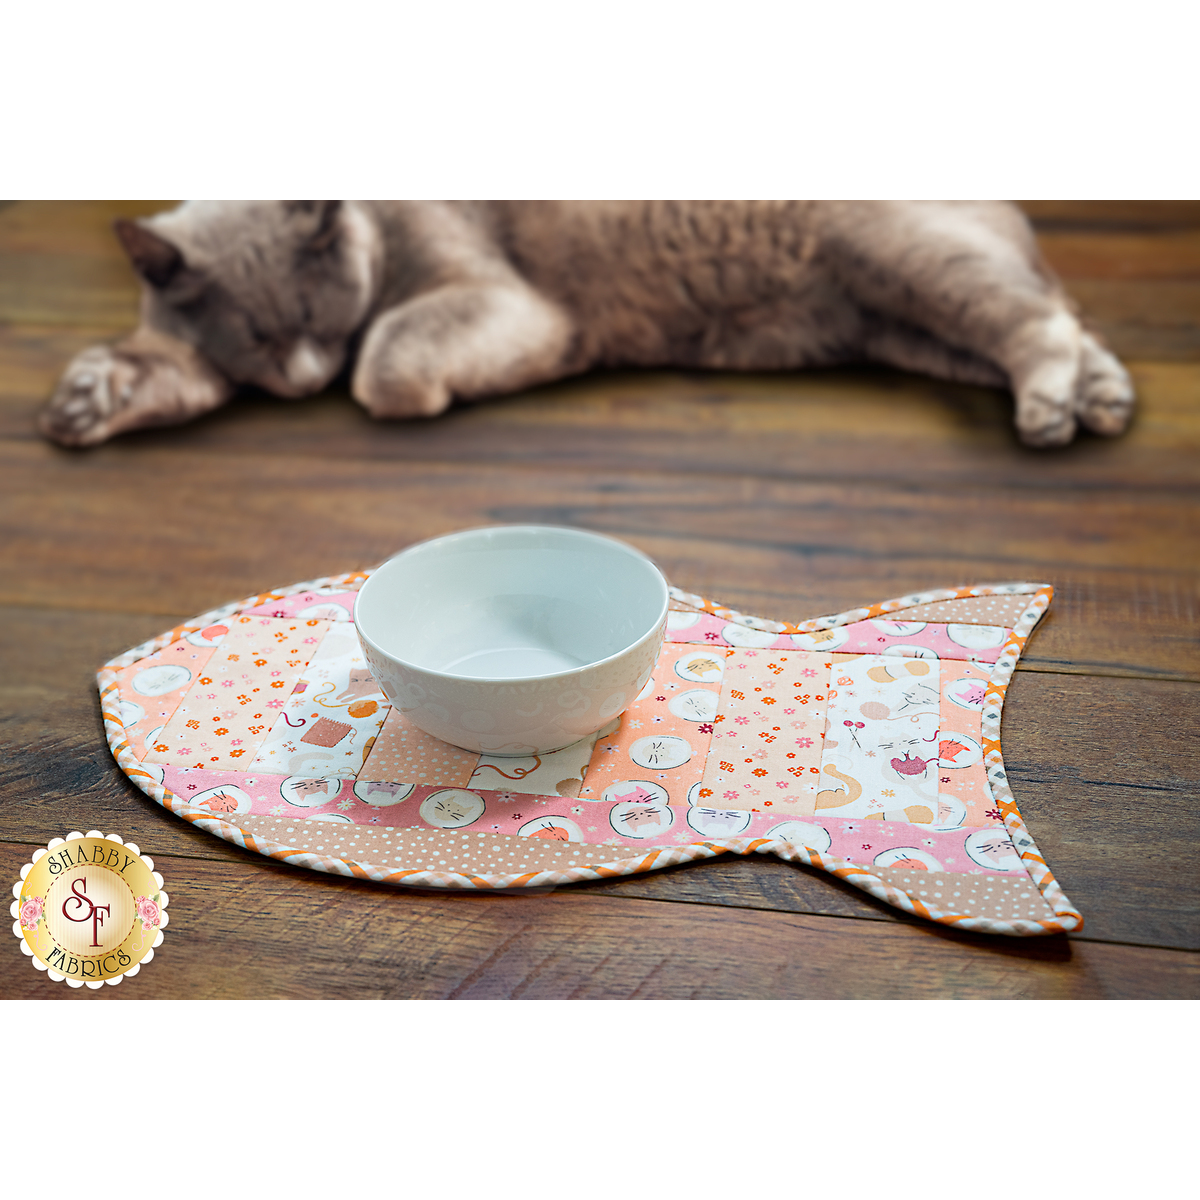 Can withstand Affirm Tram Quilt As You Go Pet Placemat Kit - Cat - Smitten Kitten | Shabby Fabrics